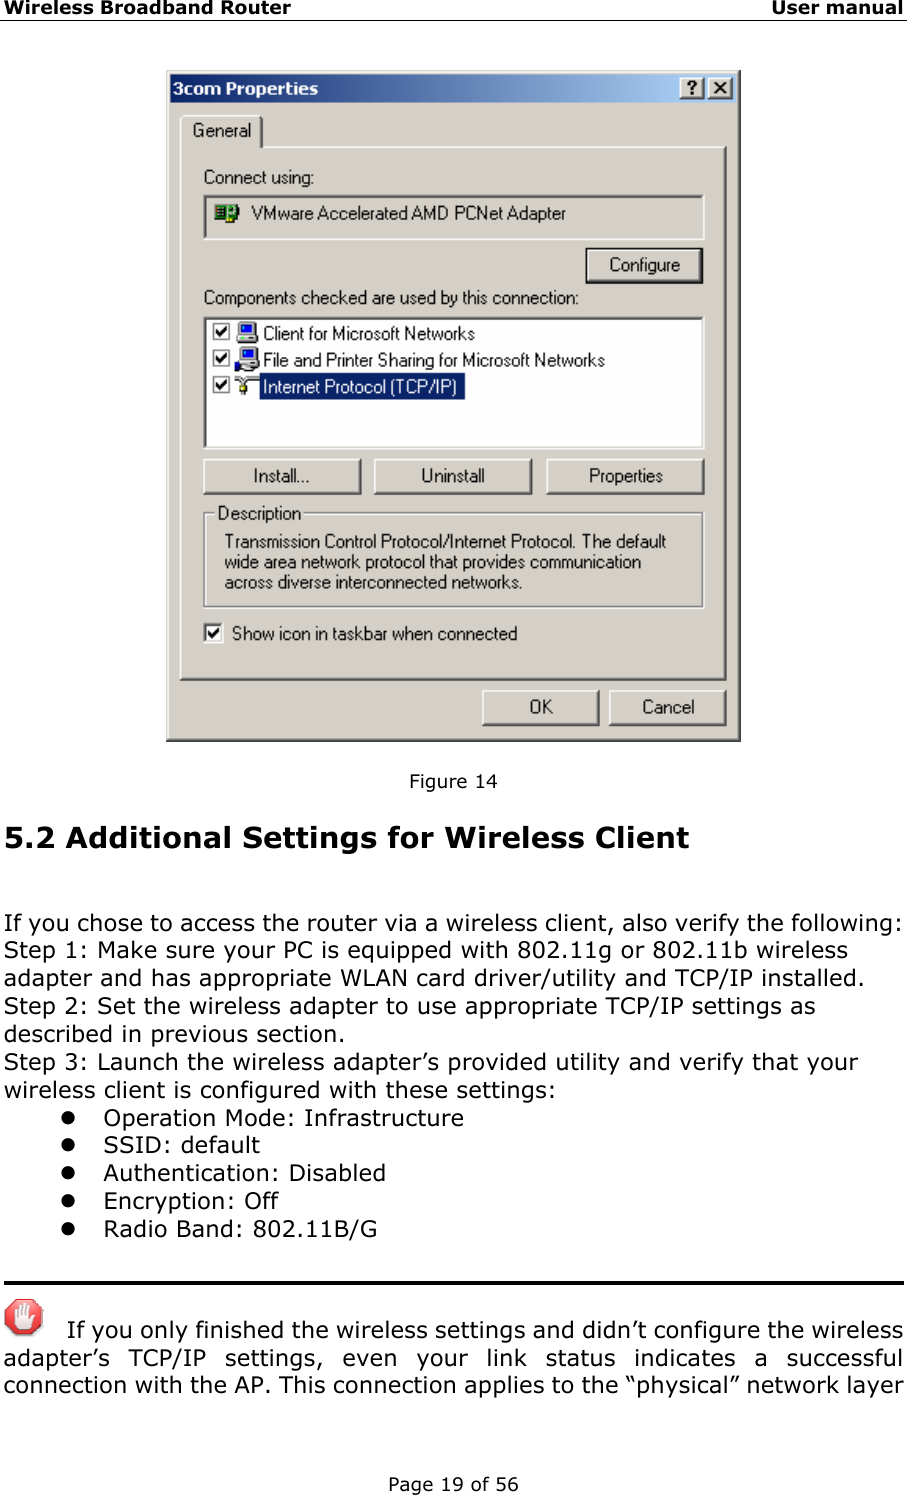 Wireless Broadband Router                                                   User manual Page 19 of 56   Figure 14 5.2 Additional Settings for Wireless Client If you chose to access the router via a wireless client, also verify the following: Step 1: Make sure your PC is equipped with 802.11g or 802.11b wireless adapter and has appropriate WLAN card driver/utility and TCP/IP installed. Step 2: Set the wireless adapter to use appropriate TCP/IP settings as described in previous section. Step 3: Launch the wireless adapter’s provided utility and verify that your wireless client is configured with these settings: z Operation Mode: Infrastructure z SSID: default z Authentication: Disabled z Encryption: Off z Radio Band: 802.11B/G       If you only finished the wireless settings and didn’t configure the wireless adapter’s TCP/IP settings, even your link status indicates a successful connection with the AP. This connection applies to the “physical” network layer 